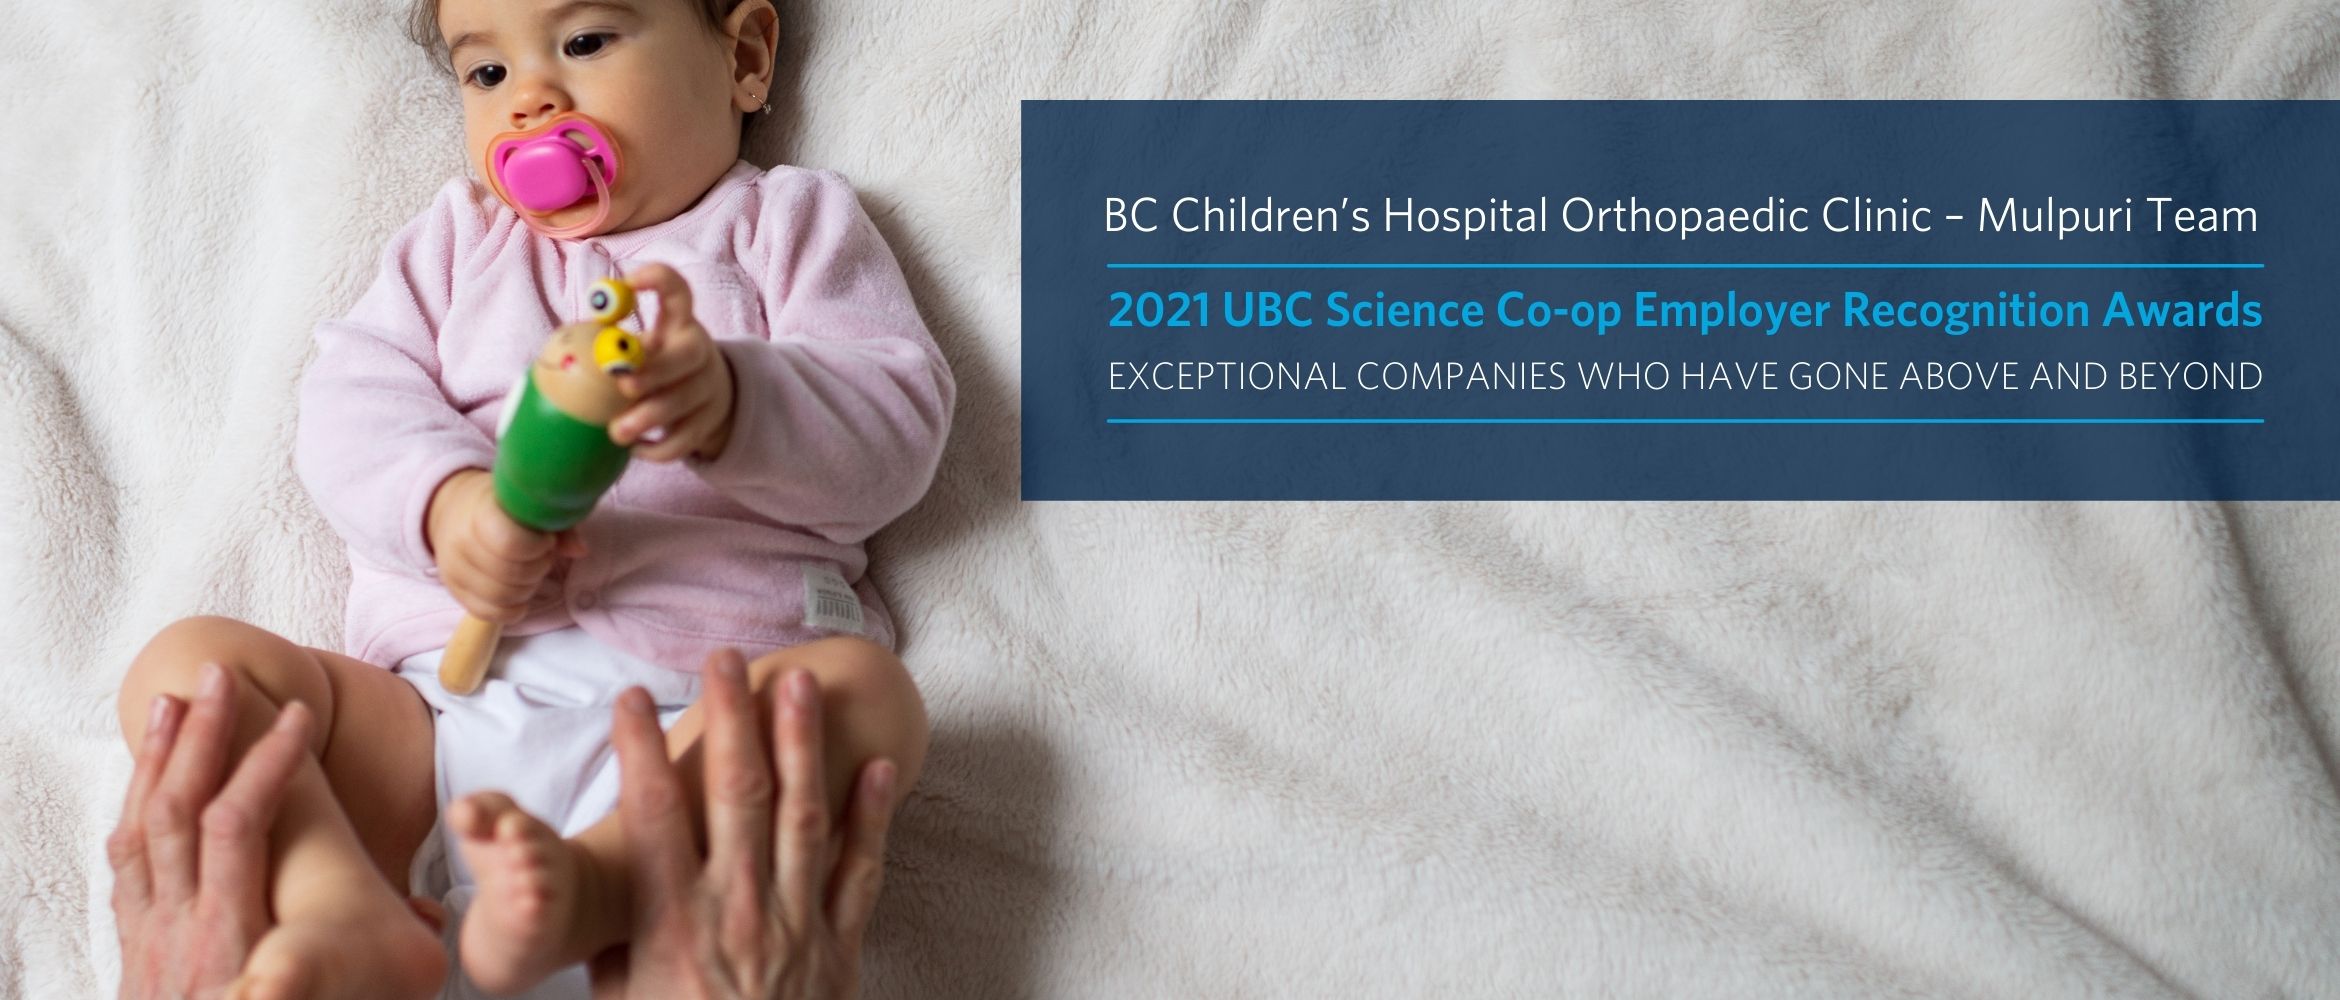 BC Children’s Hospital – Orthopaedic Clinic – Mulpuri Team Selected for the 2021 UBC Science Co-op Employer Recognition Award